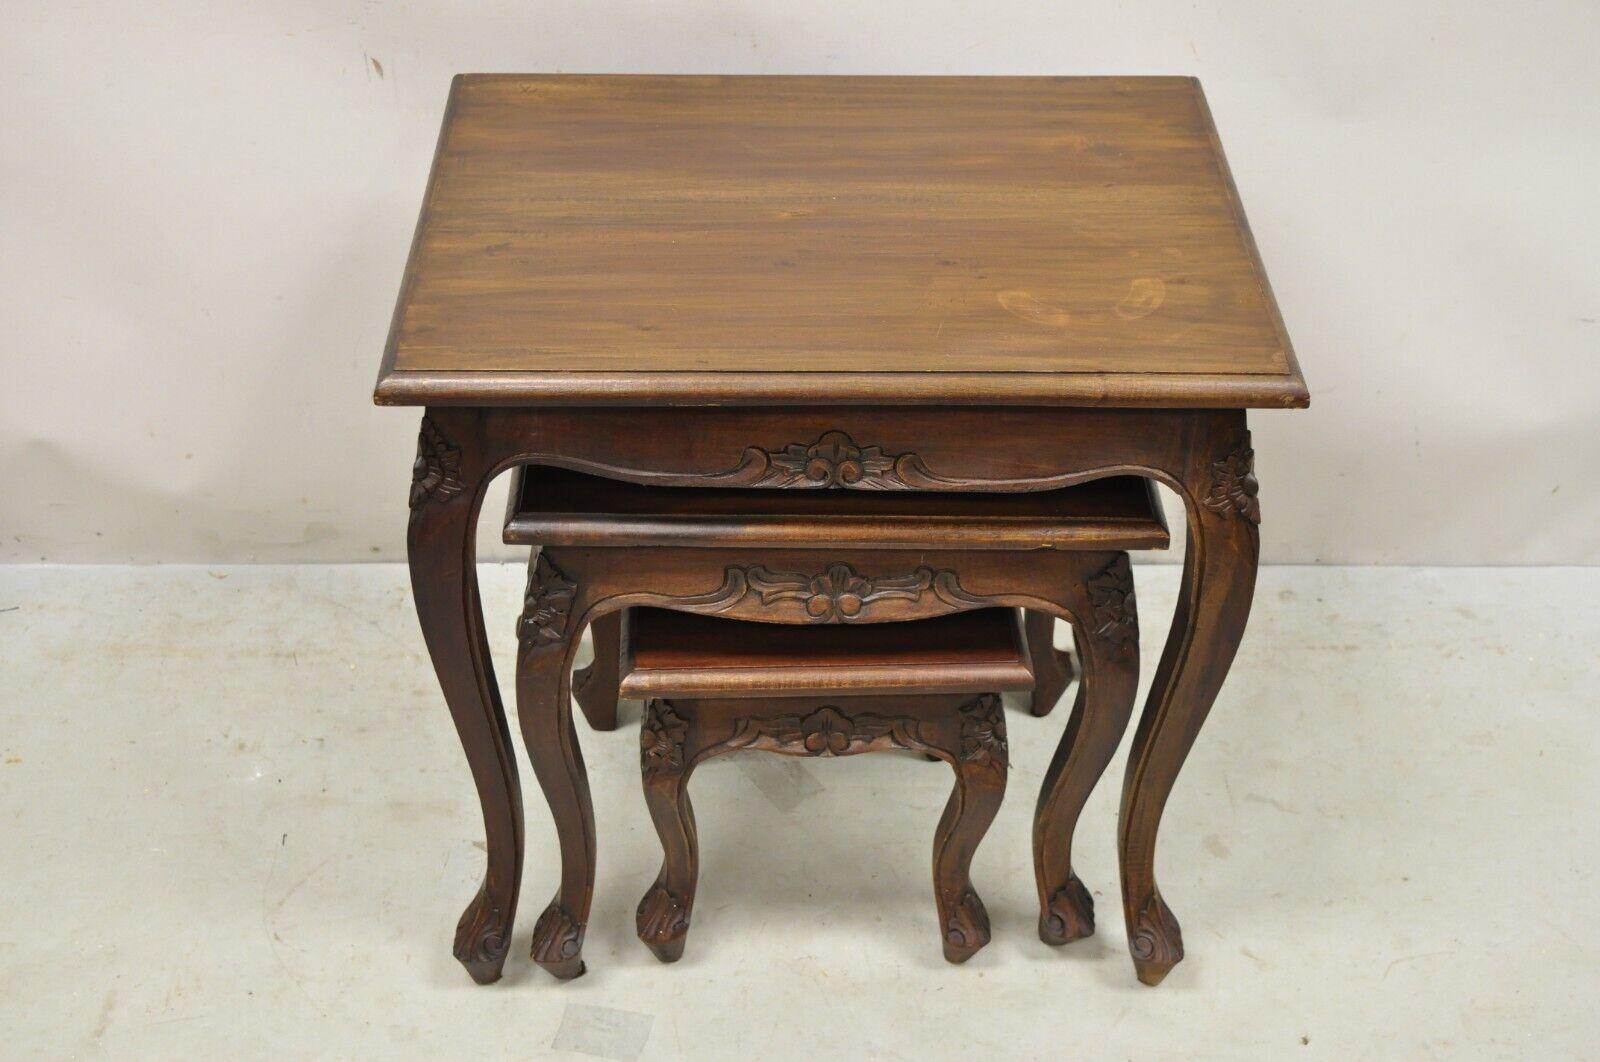 Vintage French Rococo Style Mahogany Nesting Side Tables - Set of 3. Item features 3 nesting tables, solid wood construction, beautiful wood grain, nicely carved details, cabriole legs, very nice vintage set. Circa Late 20th Century.
Measurements: